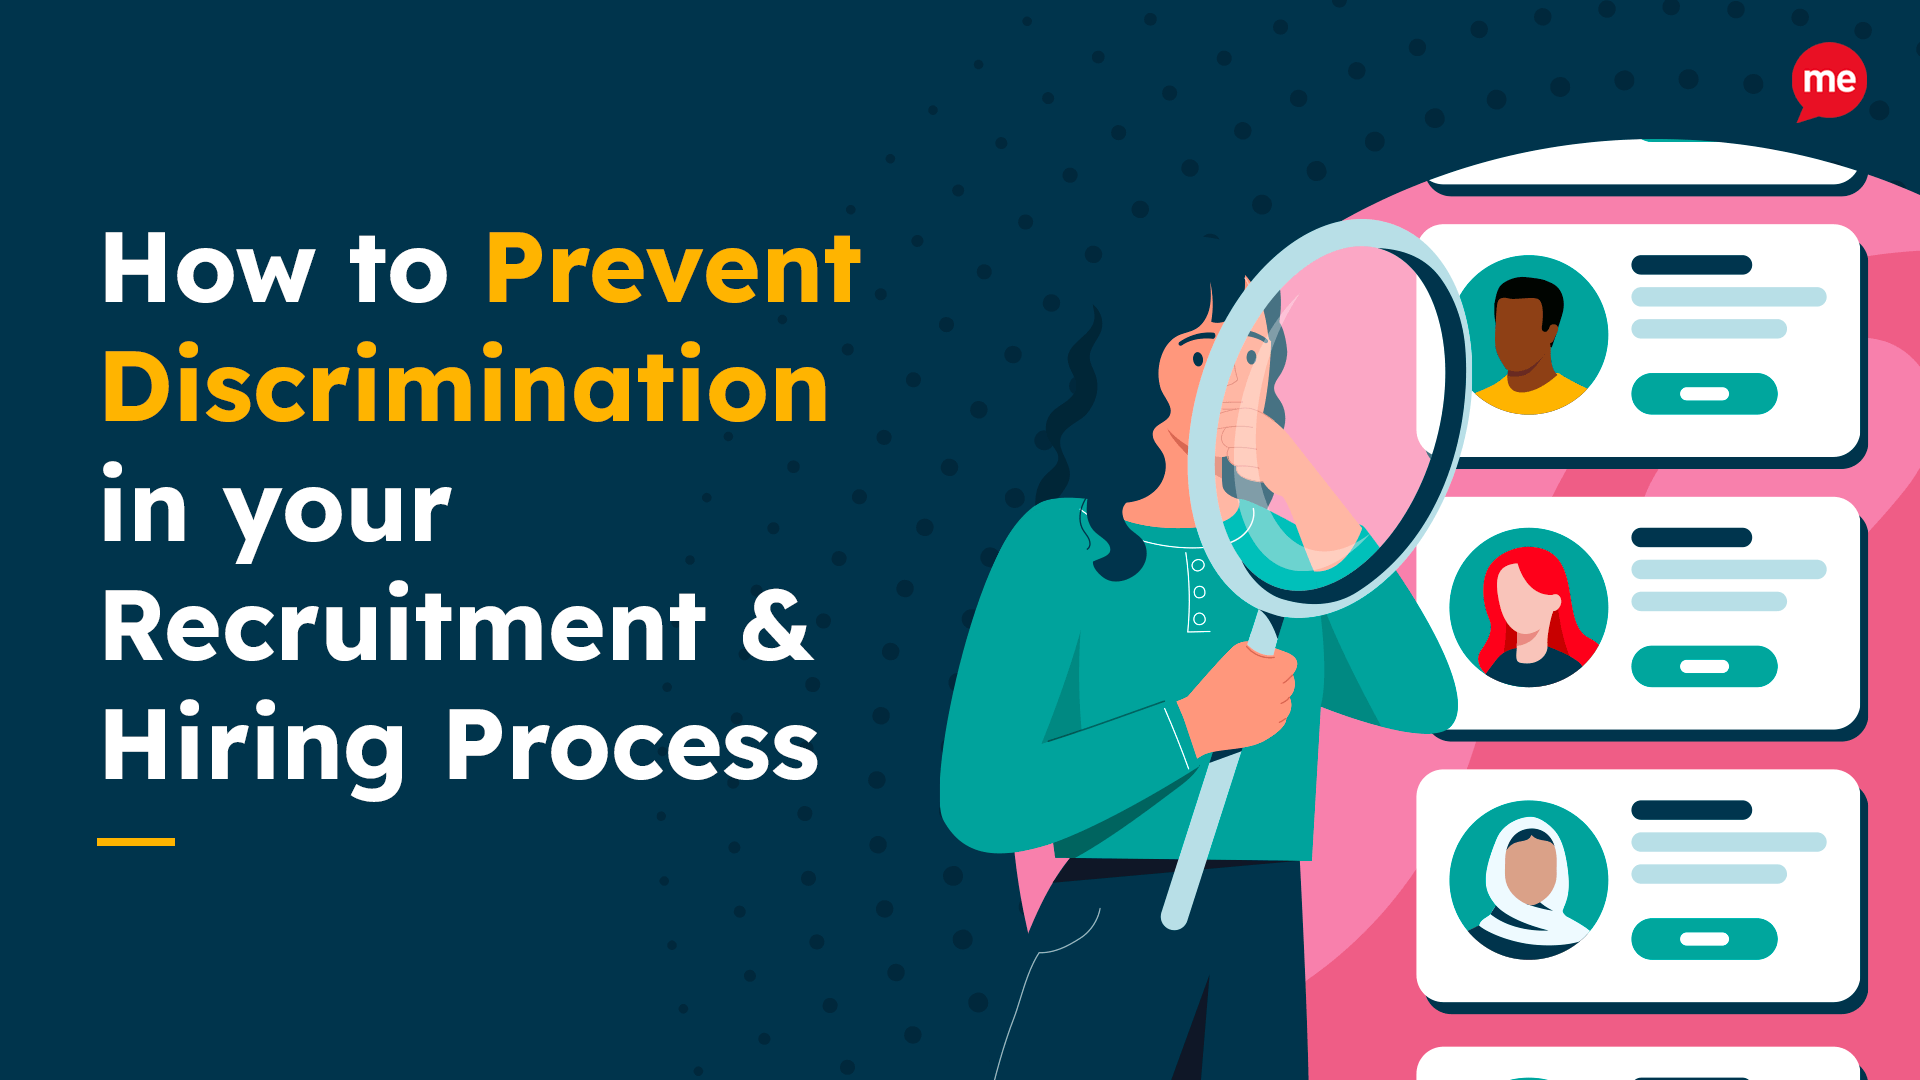 How to Prevent Discrimination in your Recruitment & Hiring Process